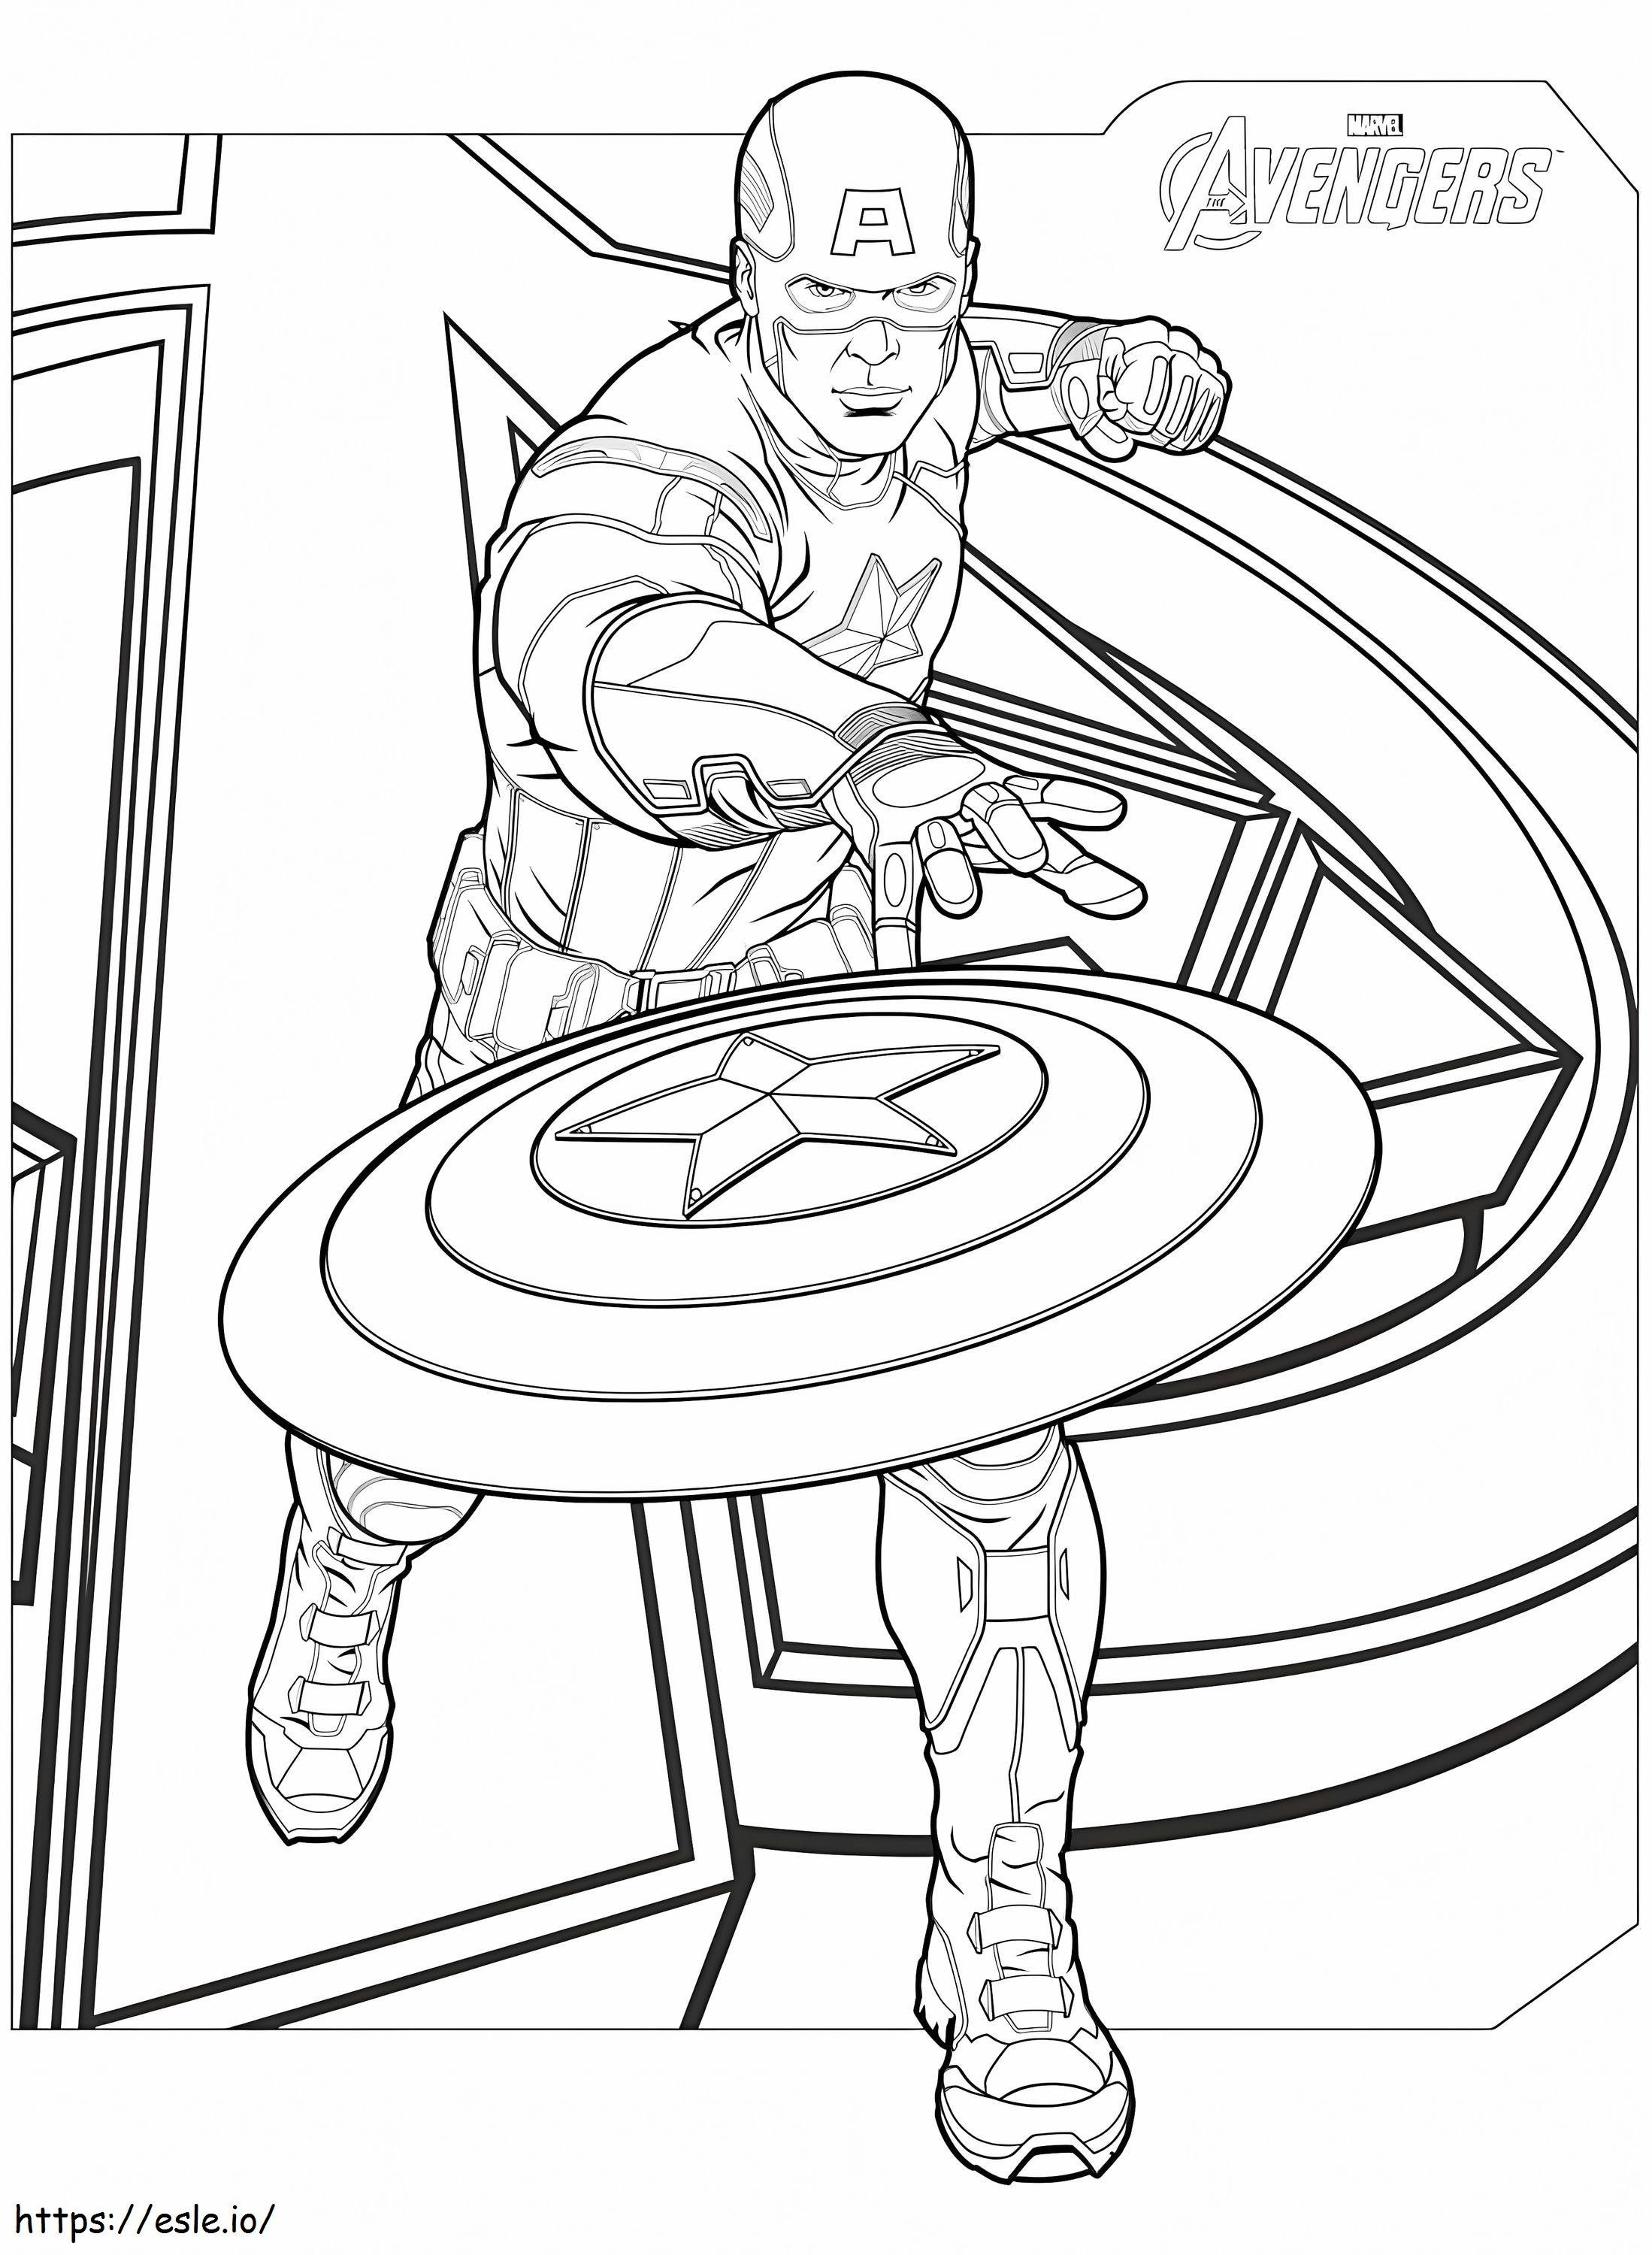 Captain America Avengers coloring page